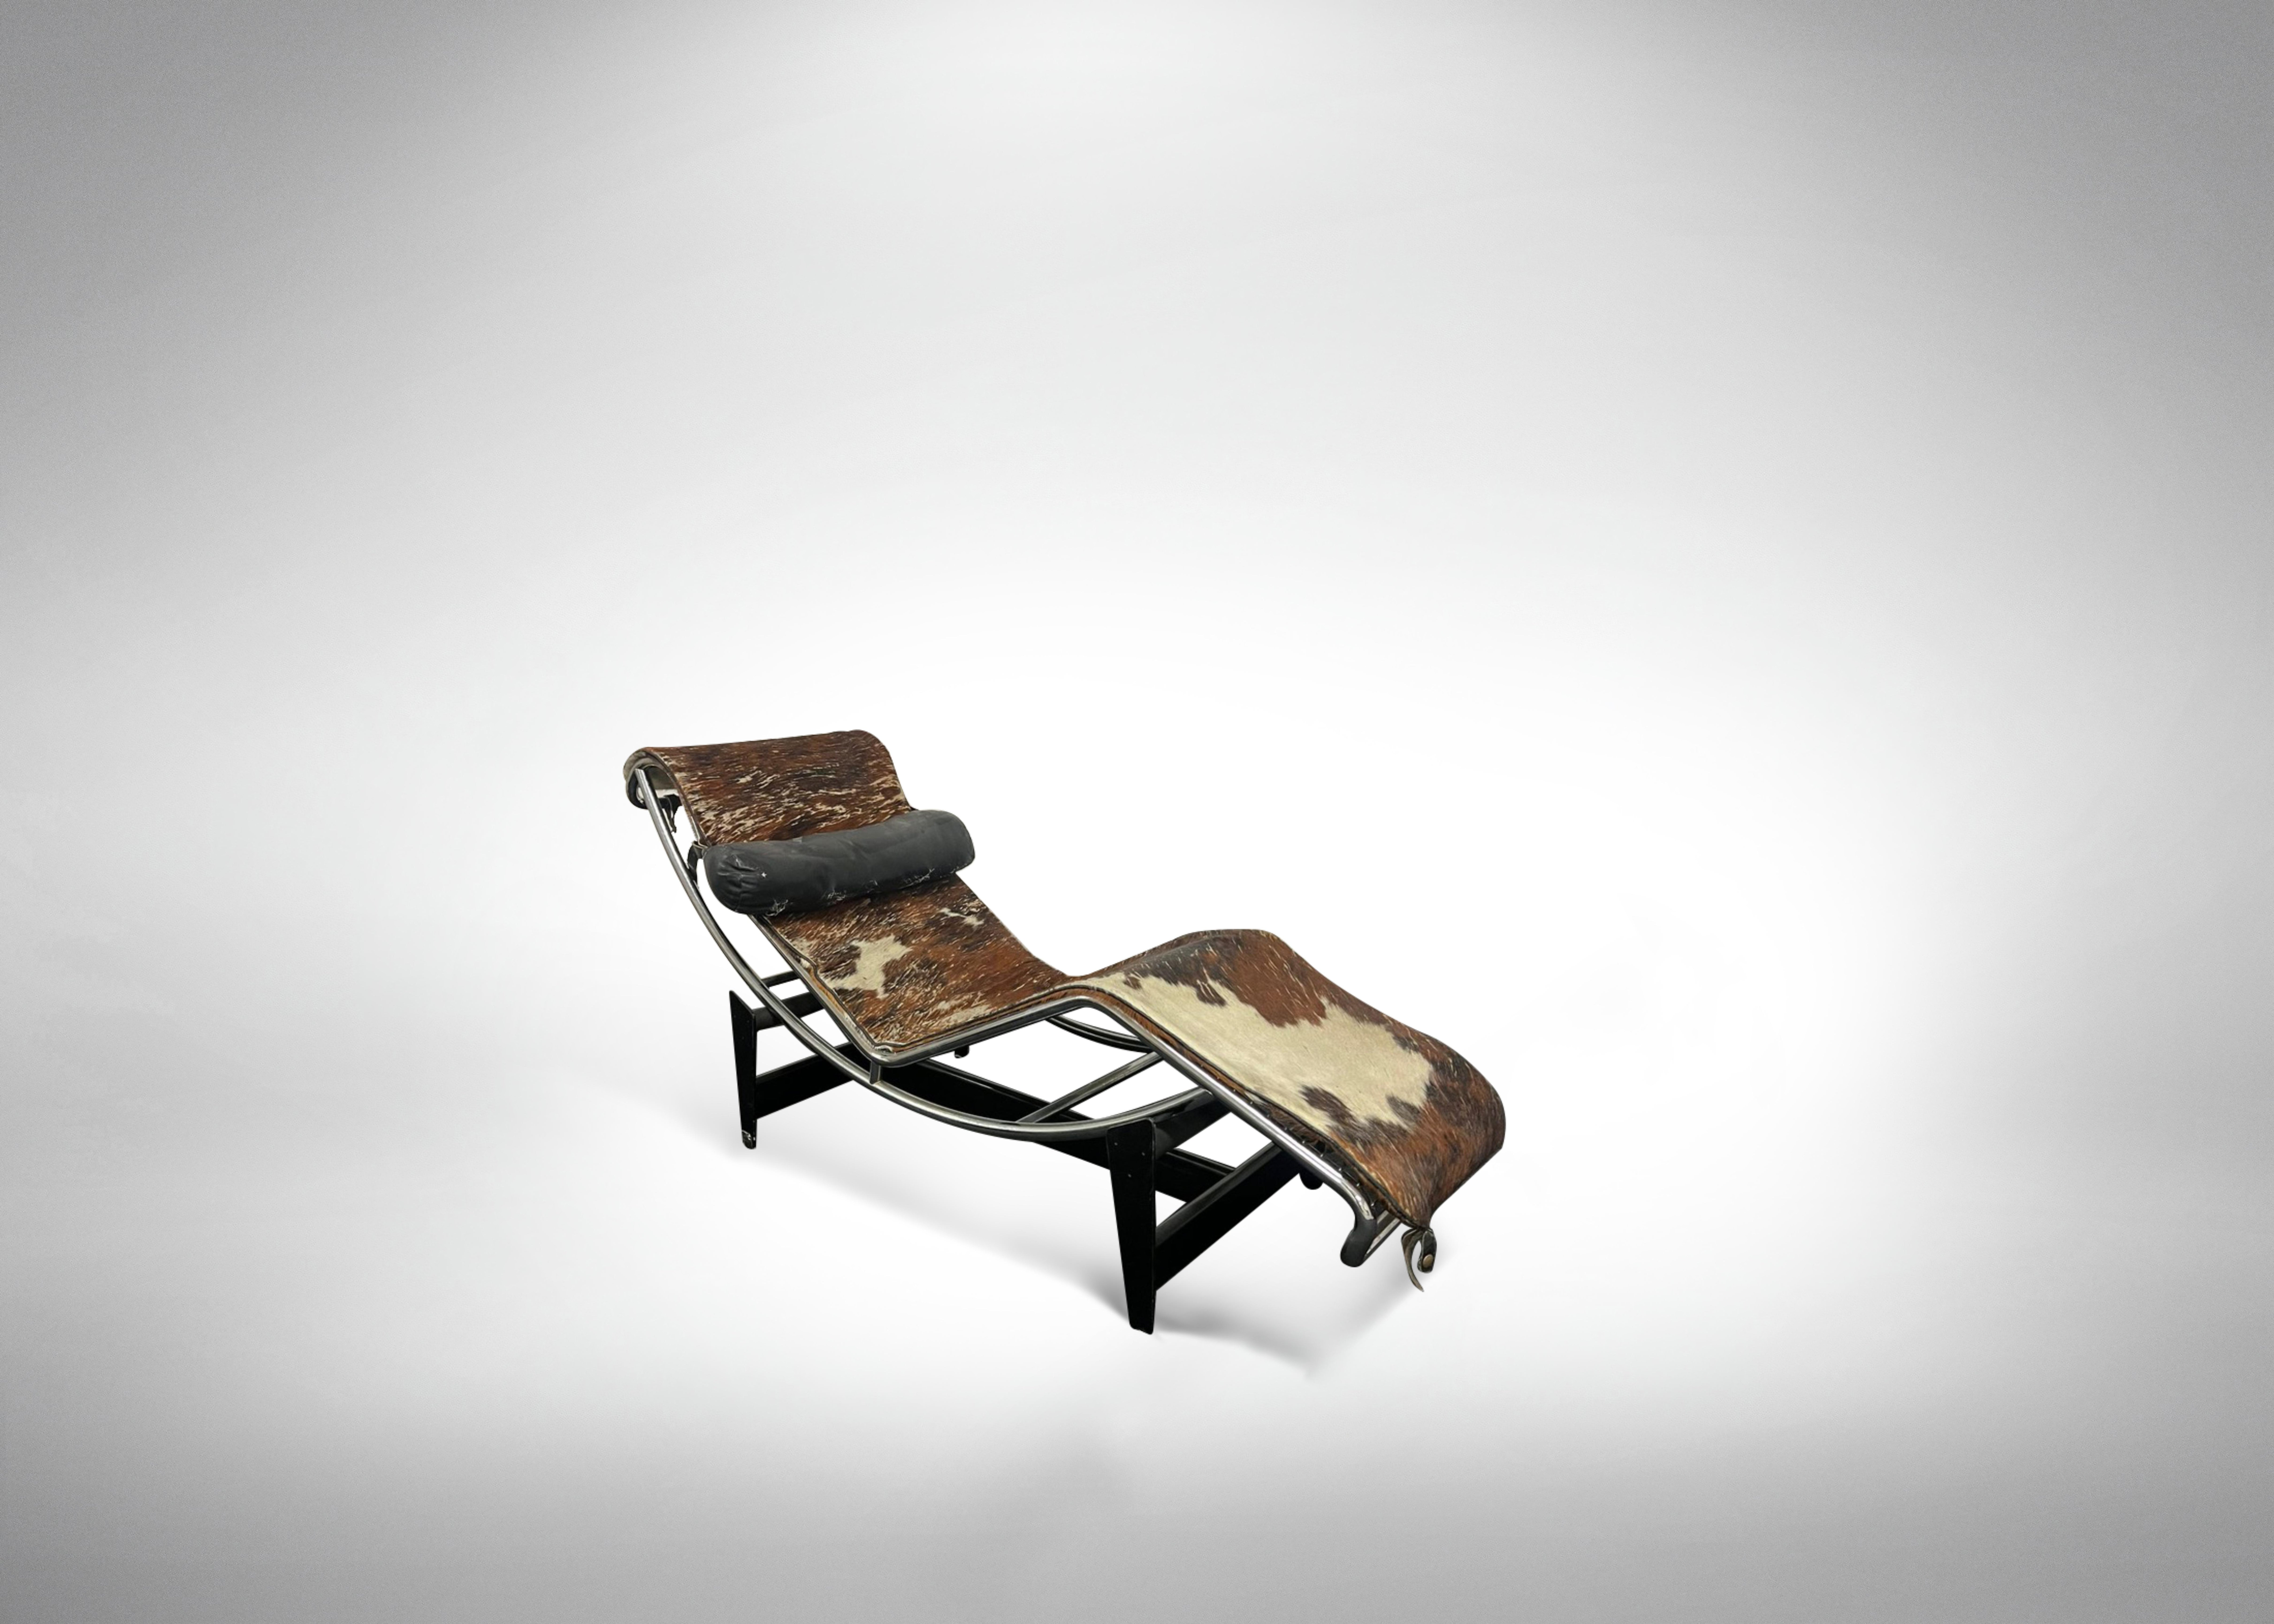 Chaise-Longue Modell LC4 von Le Corbusier, Pierre Jeanneret & Charlotte Perriand im Angebot 1